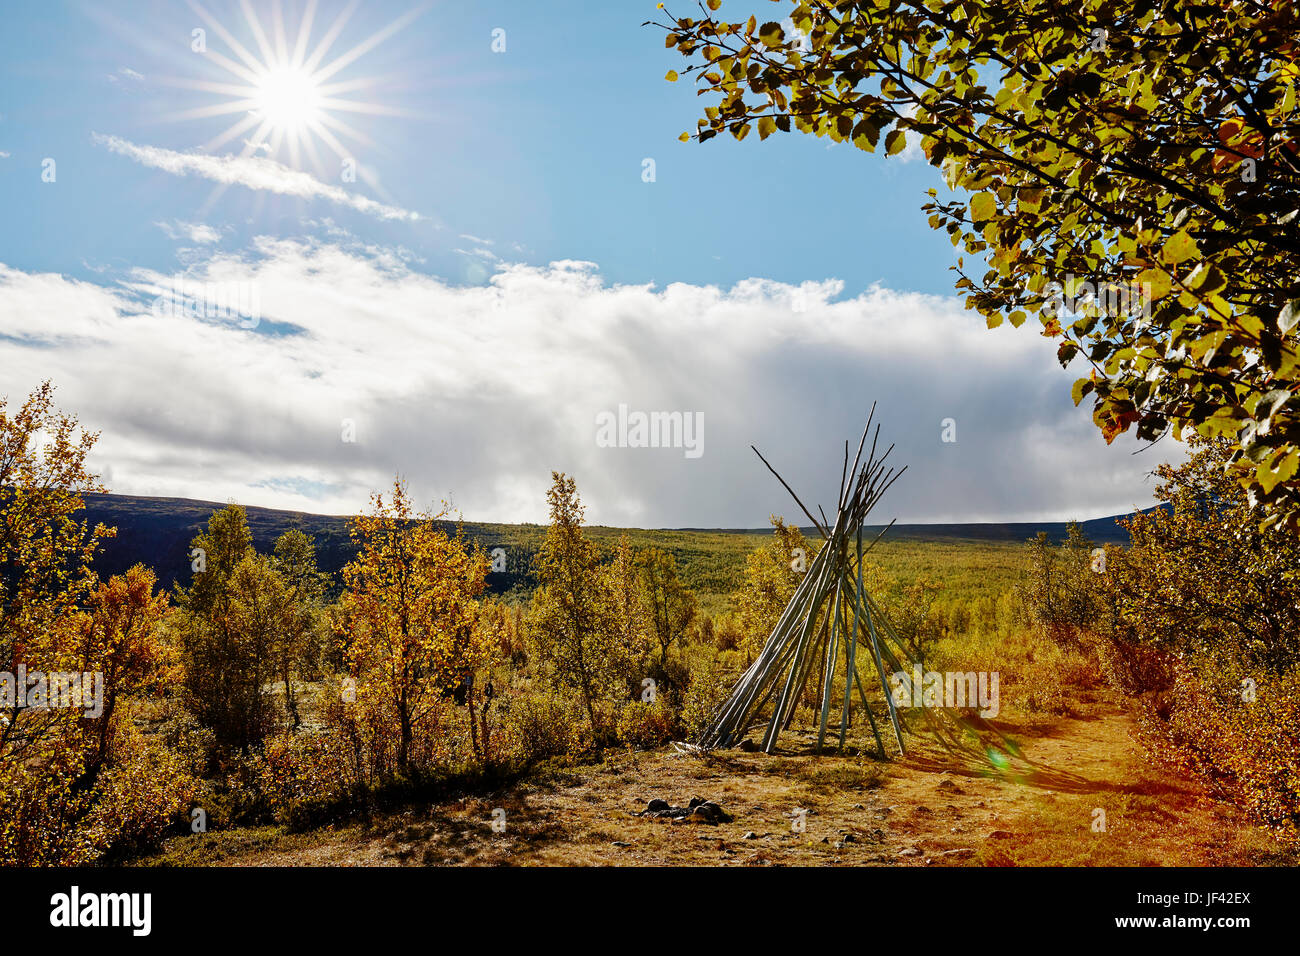 Autumn landscape with teepee-shaped log structure in foreground Stock Photo